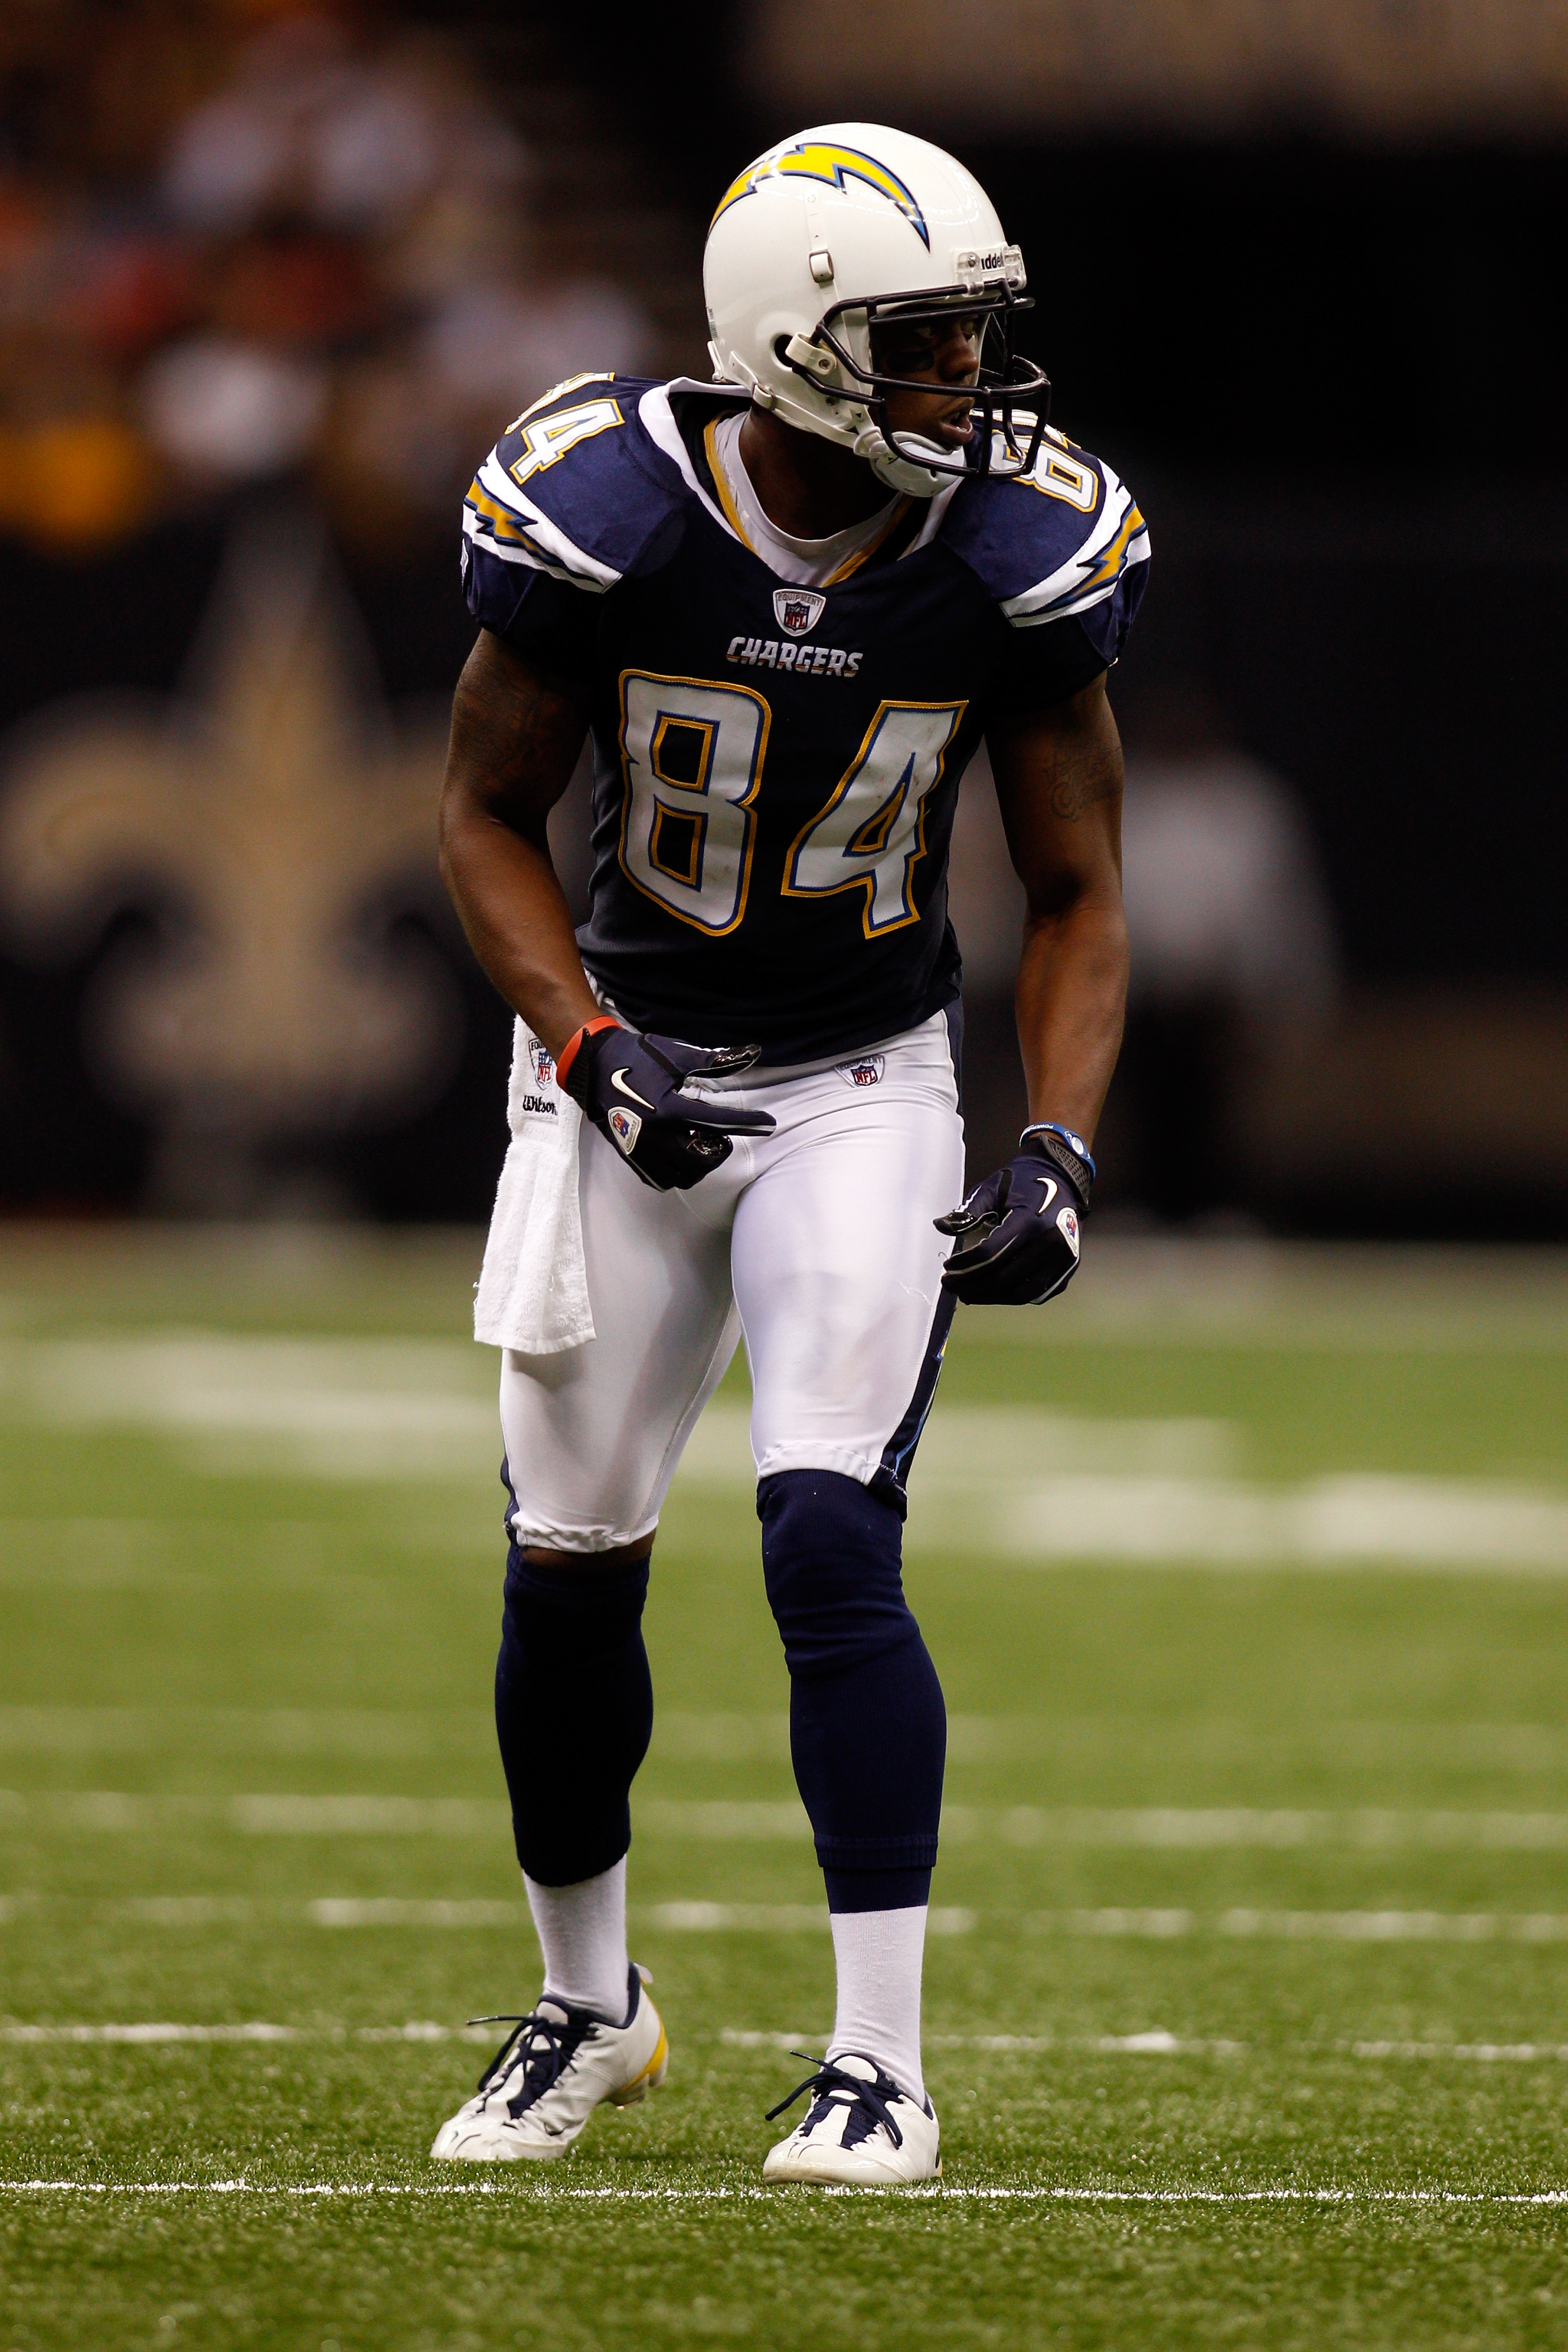 NEW ORLEANS - AUGUST 27:  Buster Davis #84 of the San Diego Chargers in action against the New Orleans Saints at the Louisiana Superdome on August 27, 2010 in New Orleans, Louisiana.  (Photo by Chris Graythen/Getty Images)